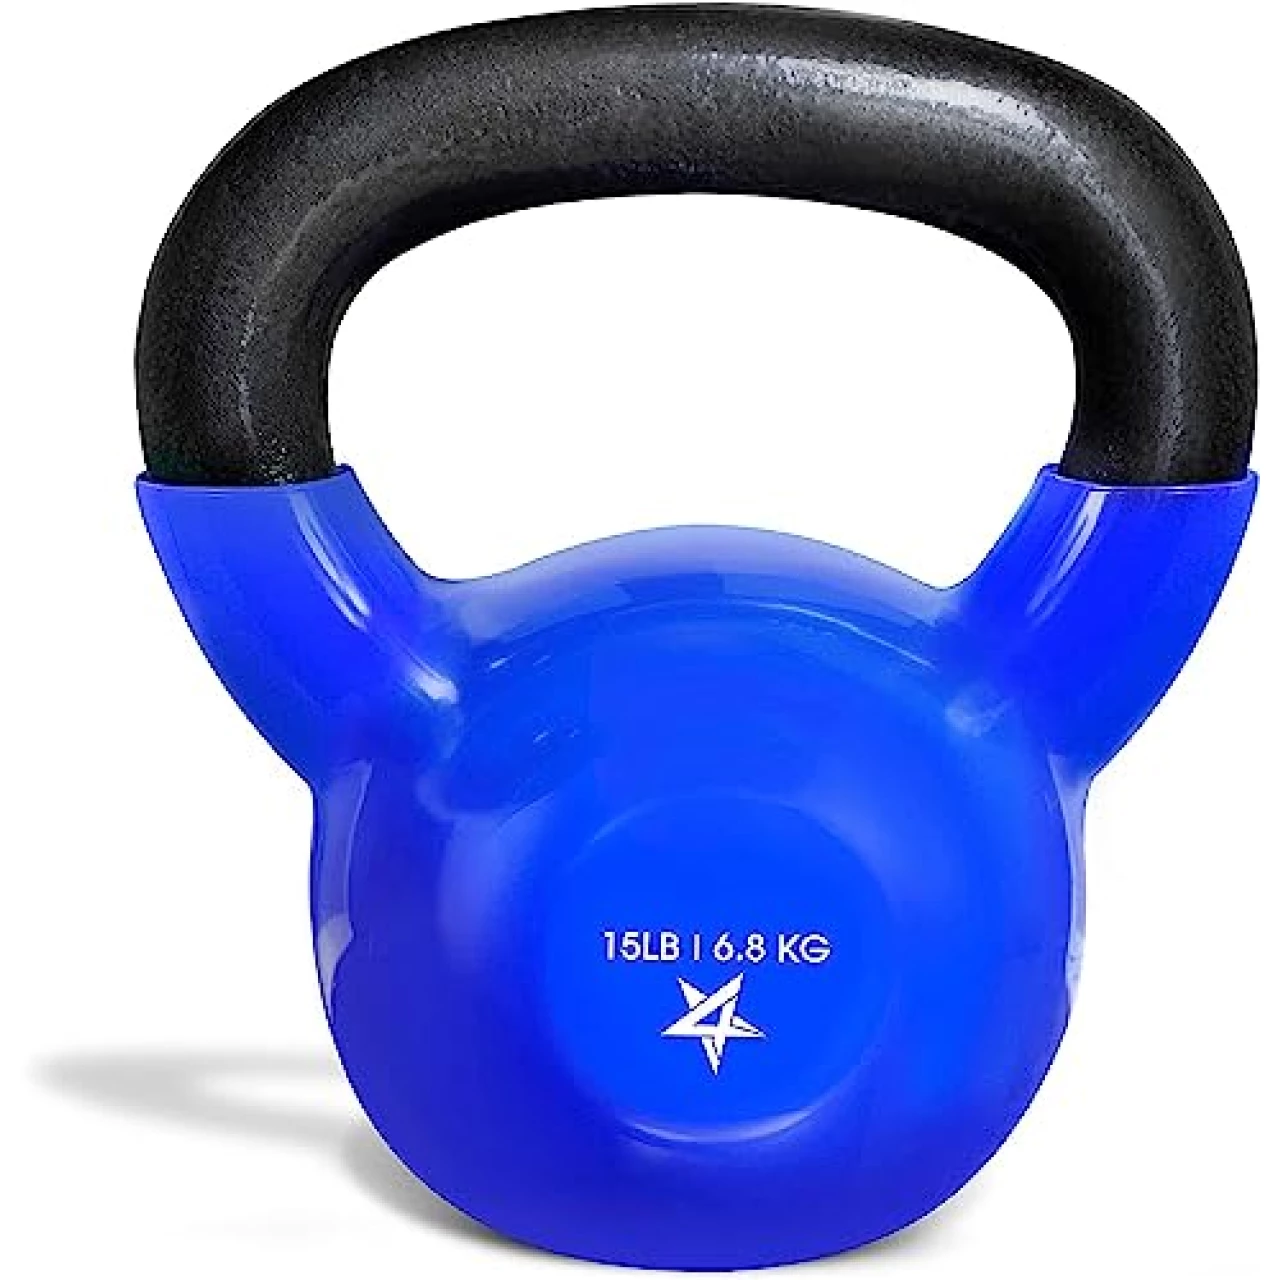 Yes4All Vinyl Coated Kettlebell Weights Set – Great for Full Body Workout and Strength Training – Vinyl Kettlebell 15 lbs